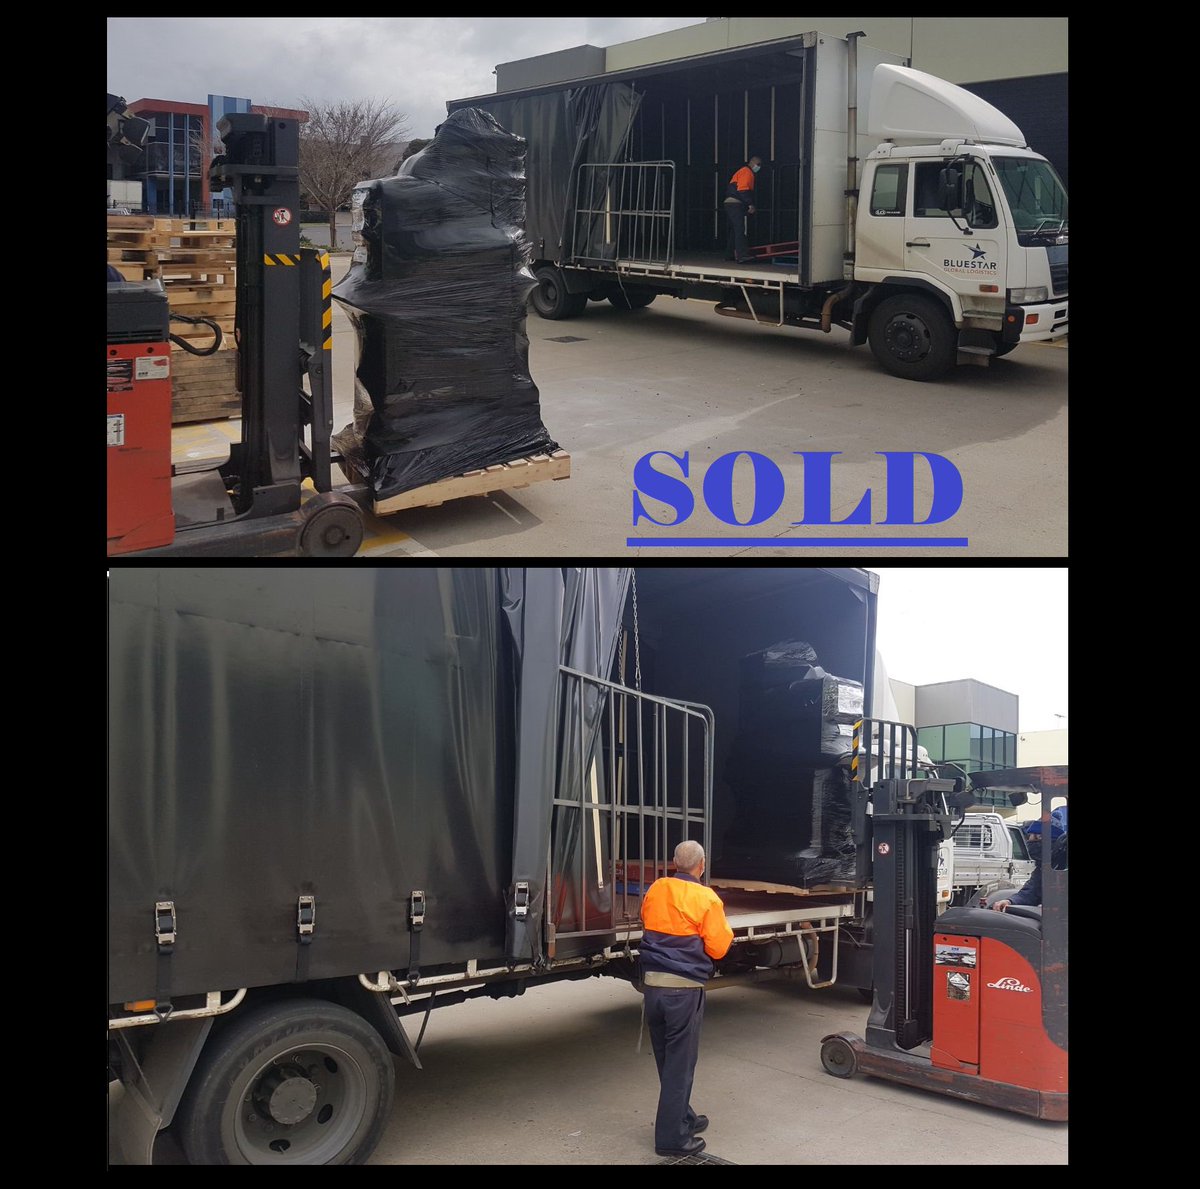 ** SOLD **
DG70 with an automatic pneumatic filter cleaning system off to a roofing manufacturer in Sydney!

03 8597 3376
industrialvac.com.au
#DelfinGlobal #IndustrialVacuum #AustralianIndustrialVacuum #DG70 #Sold #RoofingManufacturers #RoofManufacturing